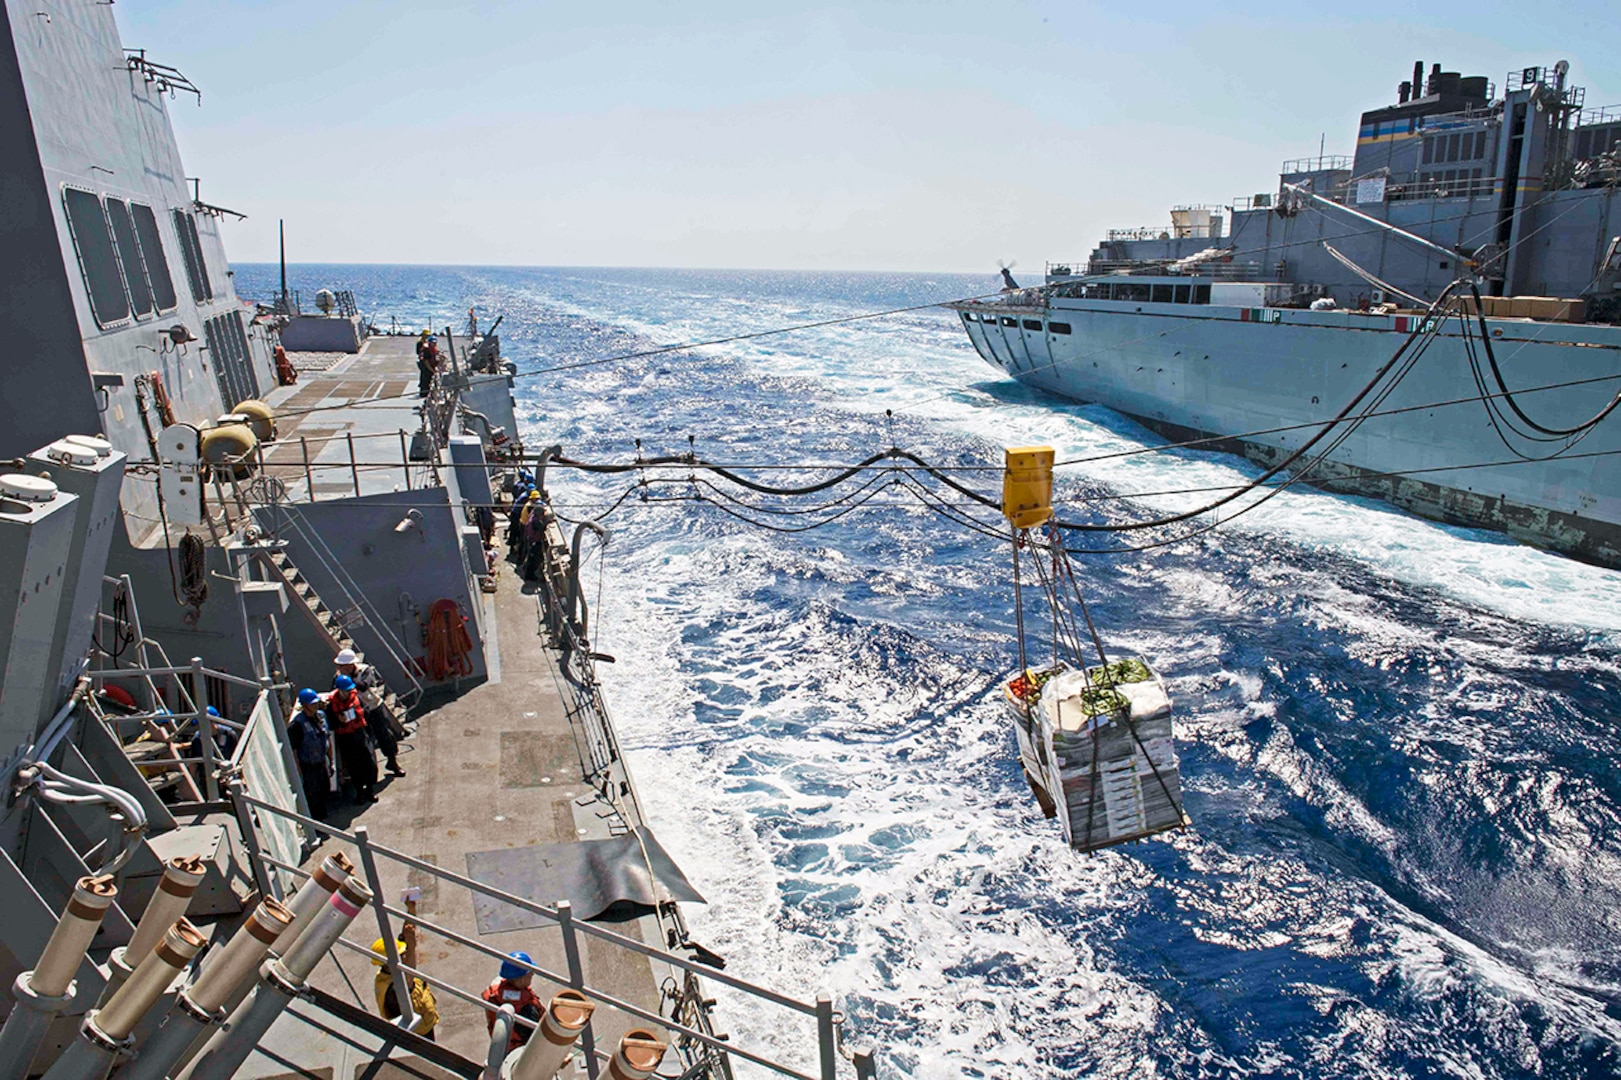 Food and fuel like these being transferred during a replenishment at sea on the African coast are among items DLA buys from African businesses to decrease customers’ storage costs and support the local economy.